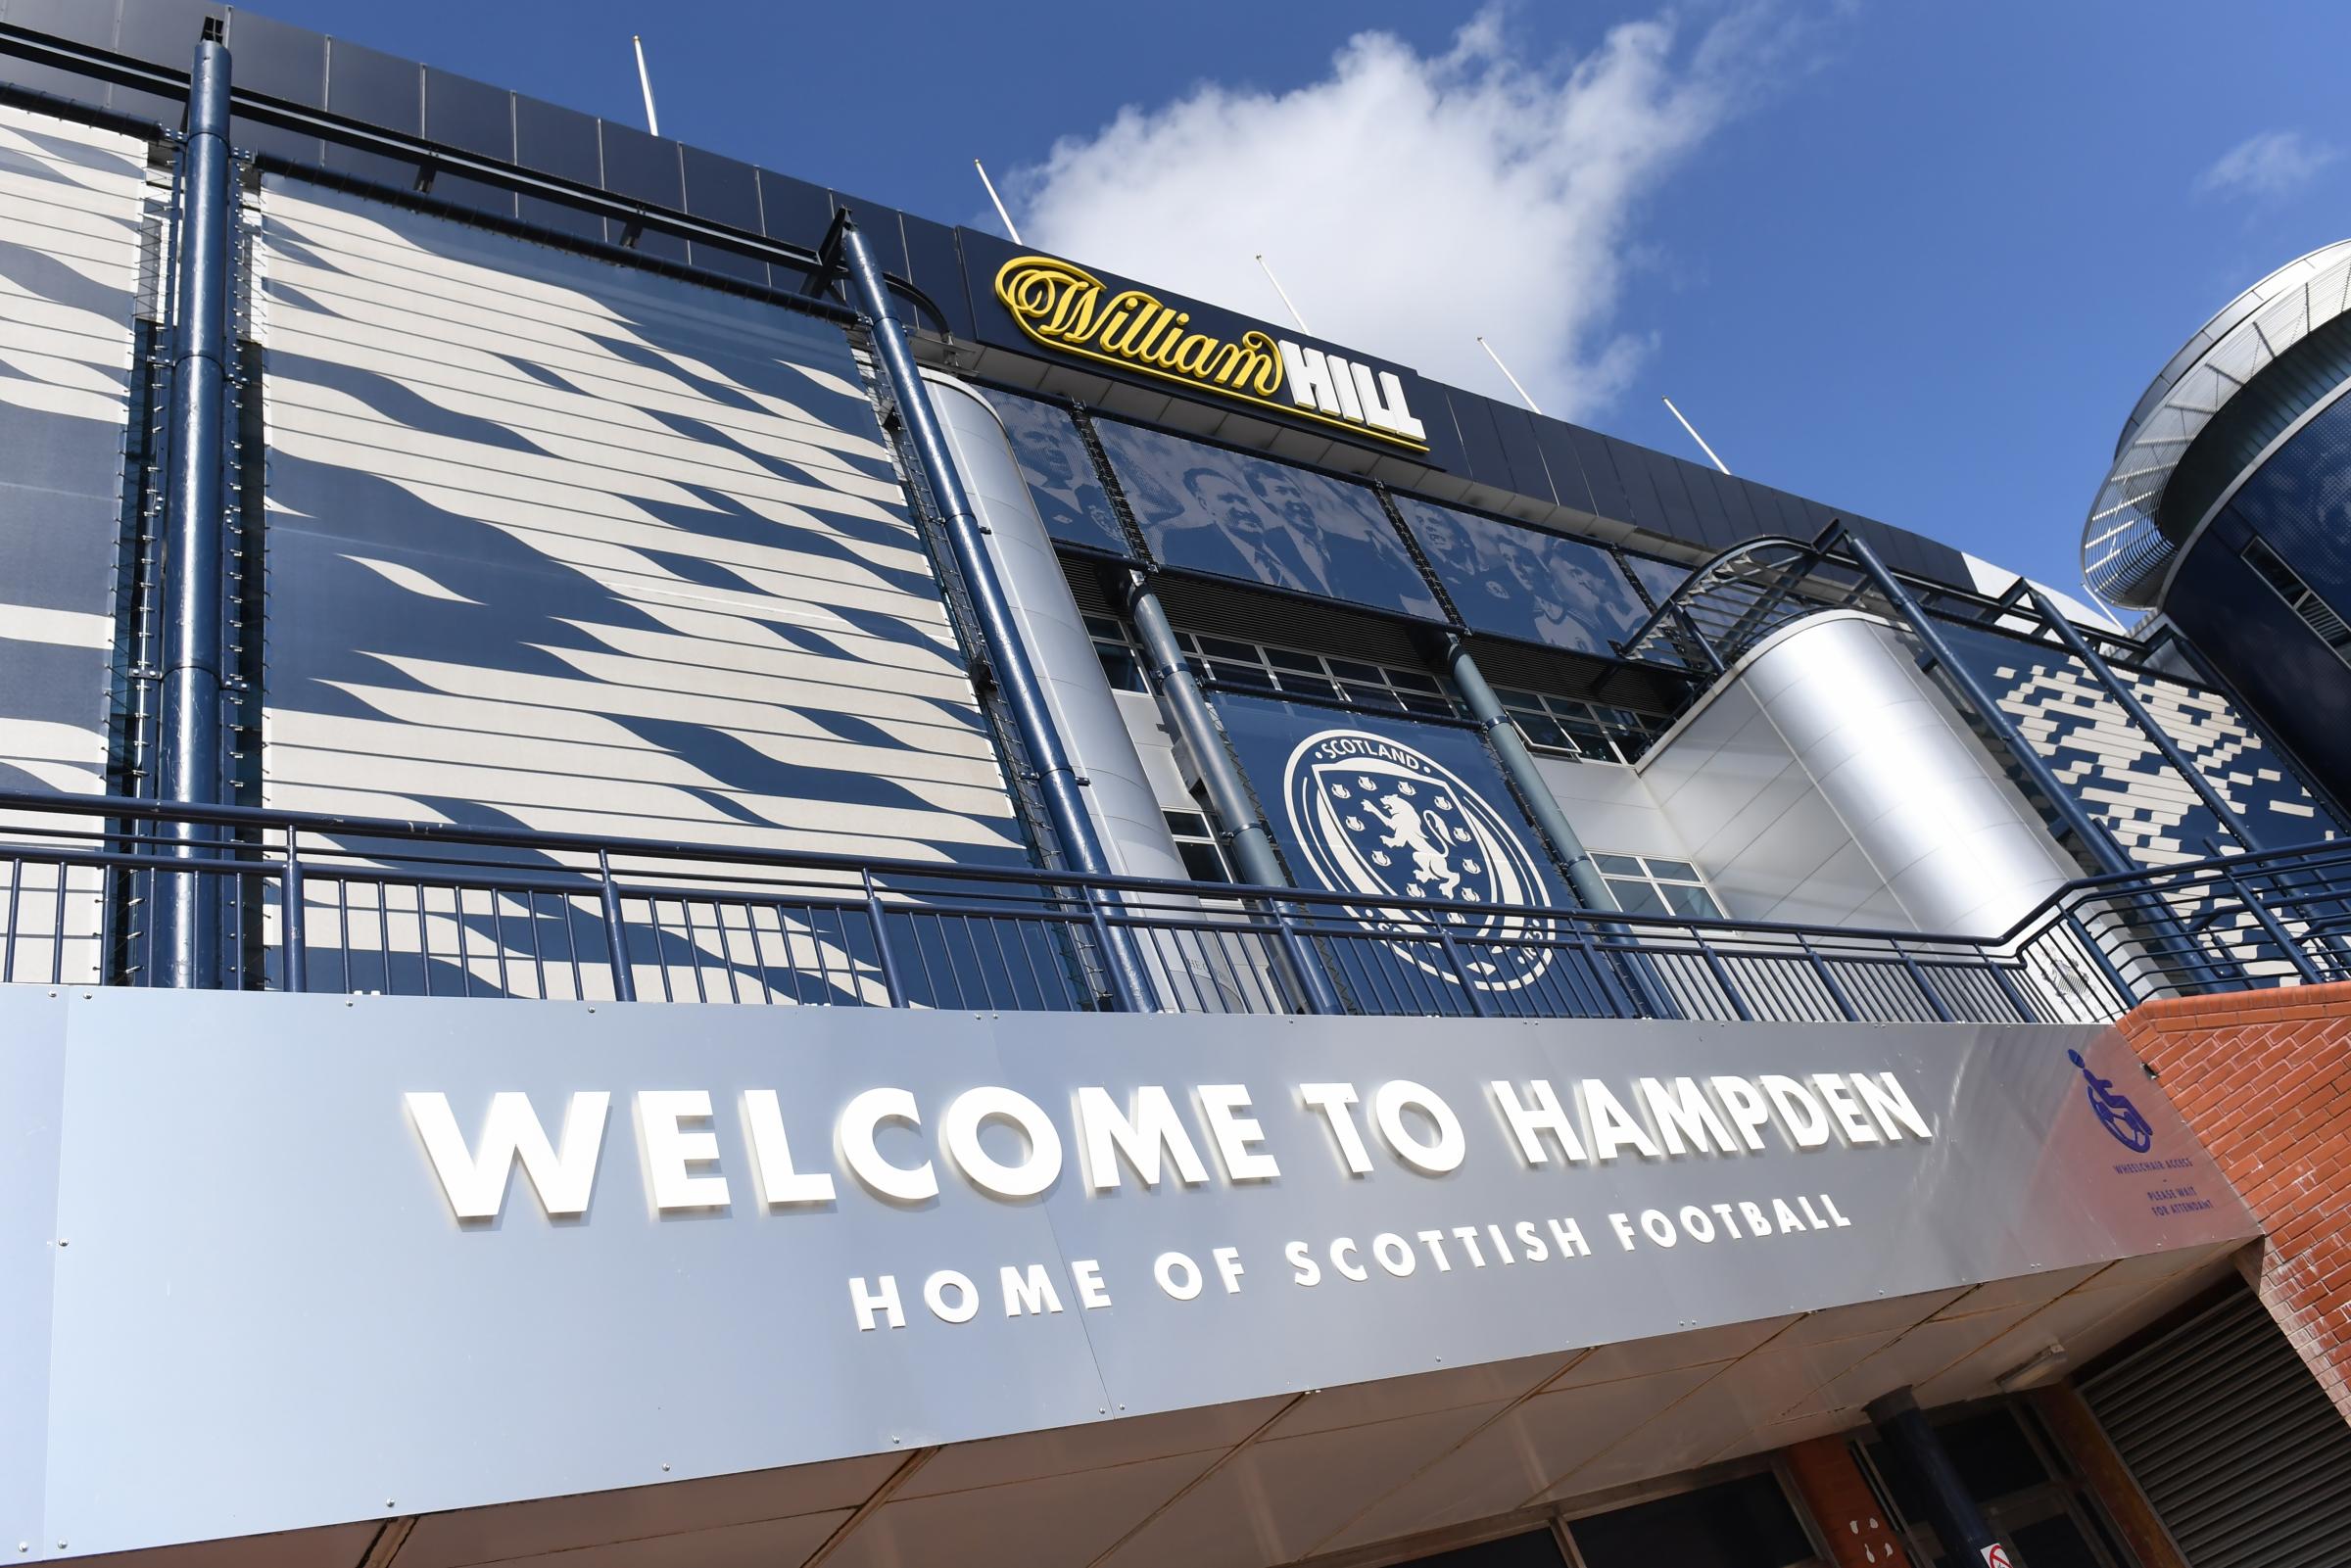 The Rangers dossier won't convince clubs to revolt - but the SPFL still have serious questions to answer